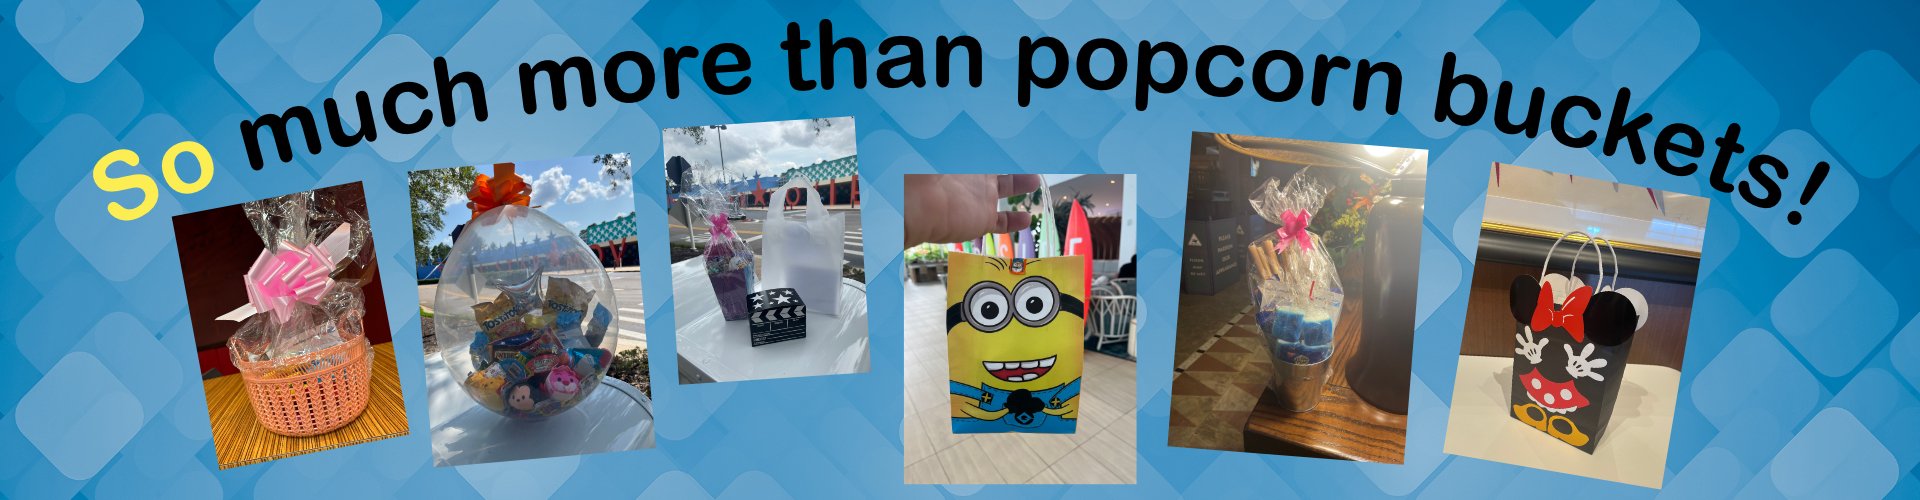 More Than Just Popcorn Buckets!